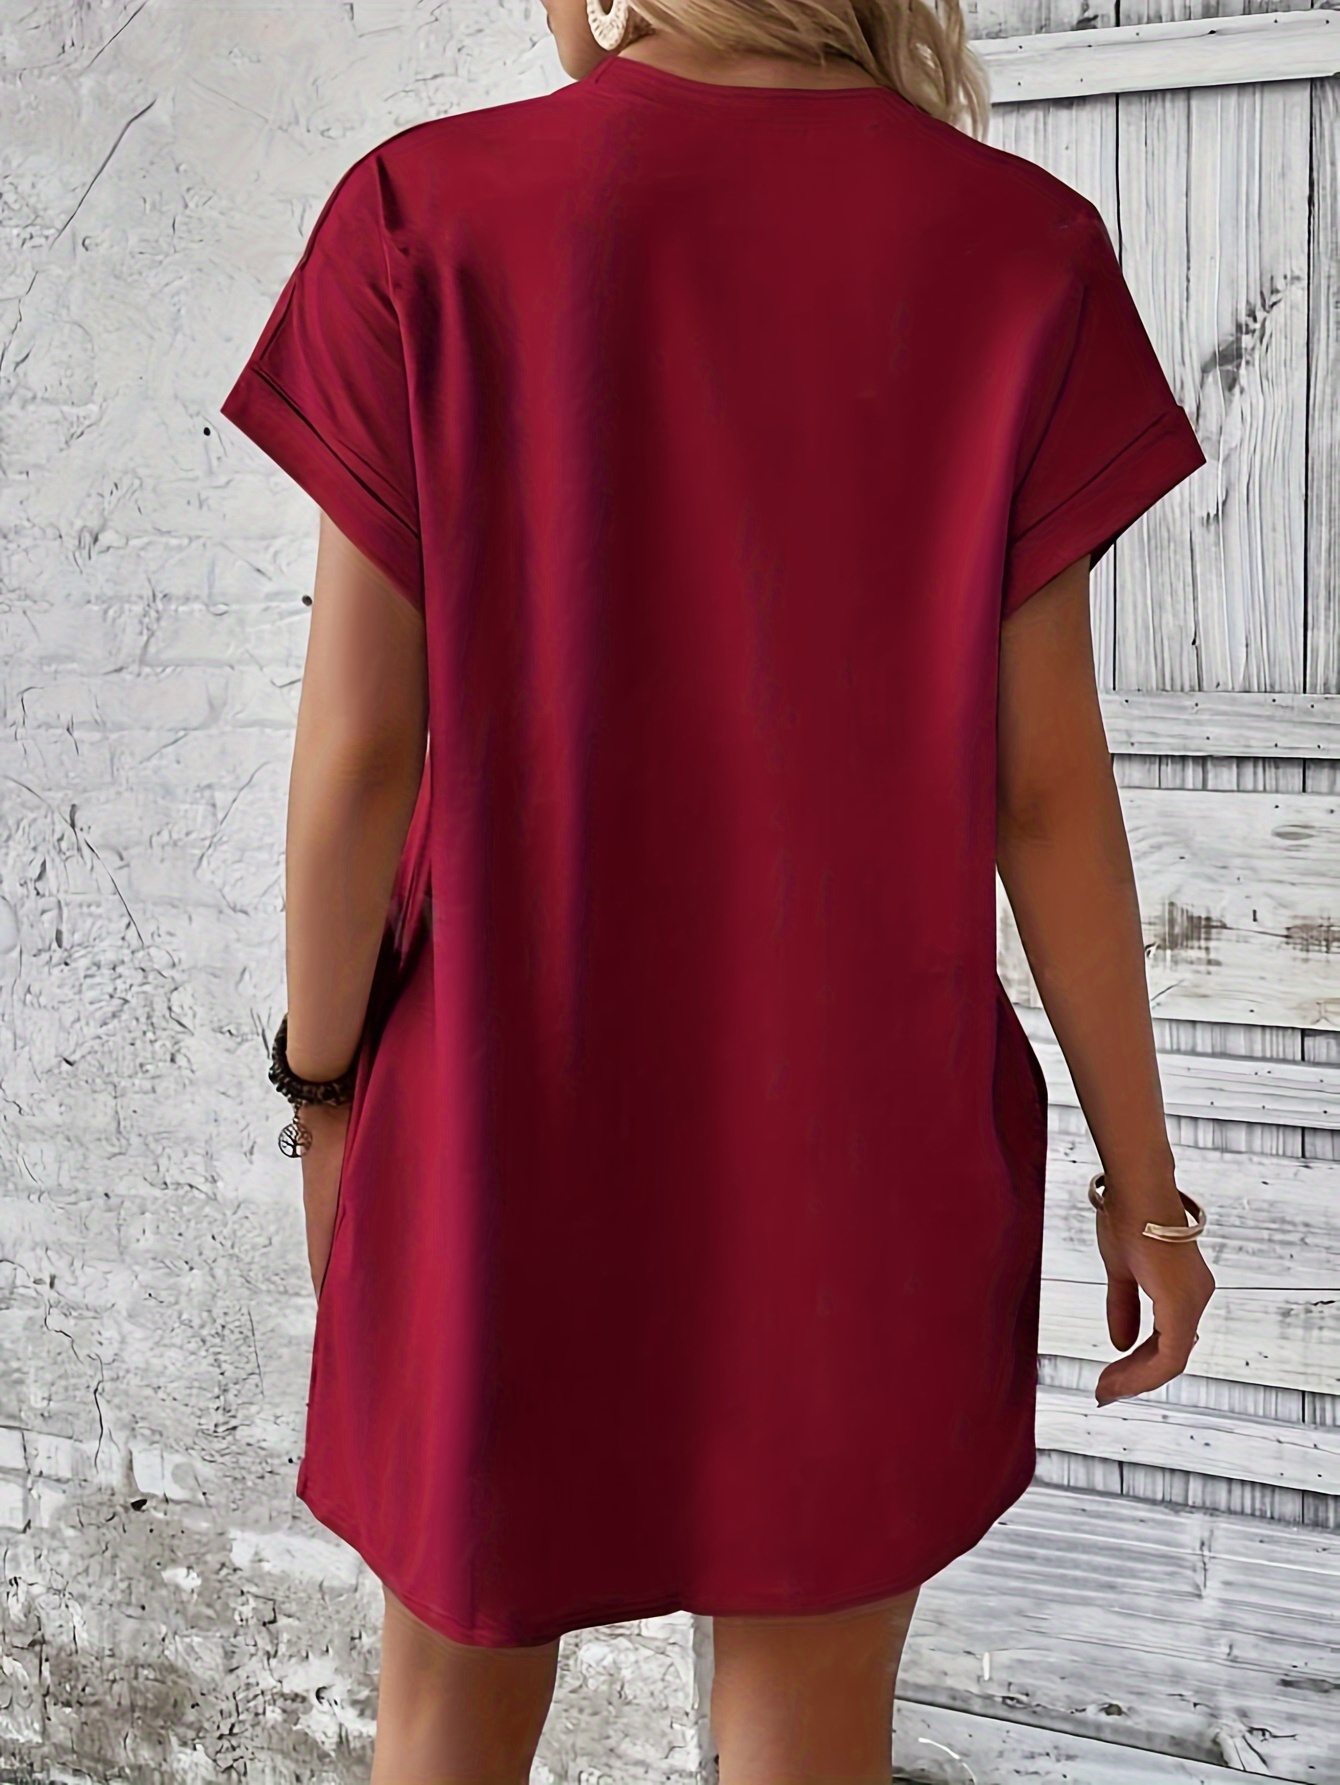 crew neck with pocket dress casual short sleeve dress for spring summer womens clothing burgundy 1